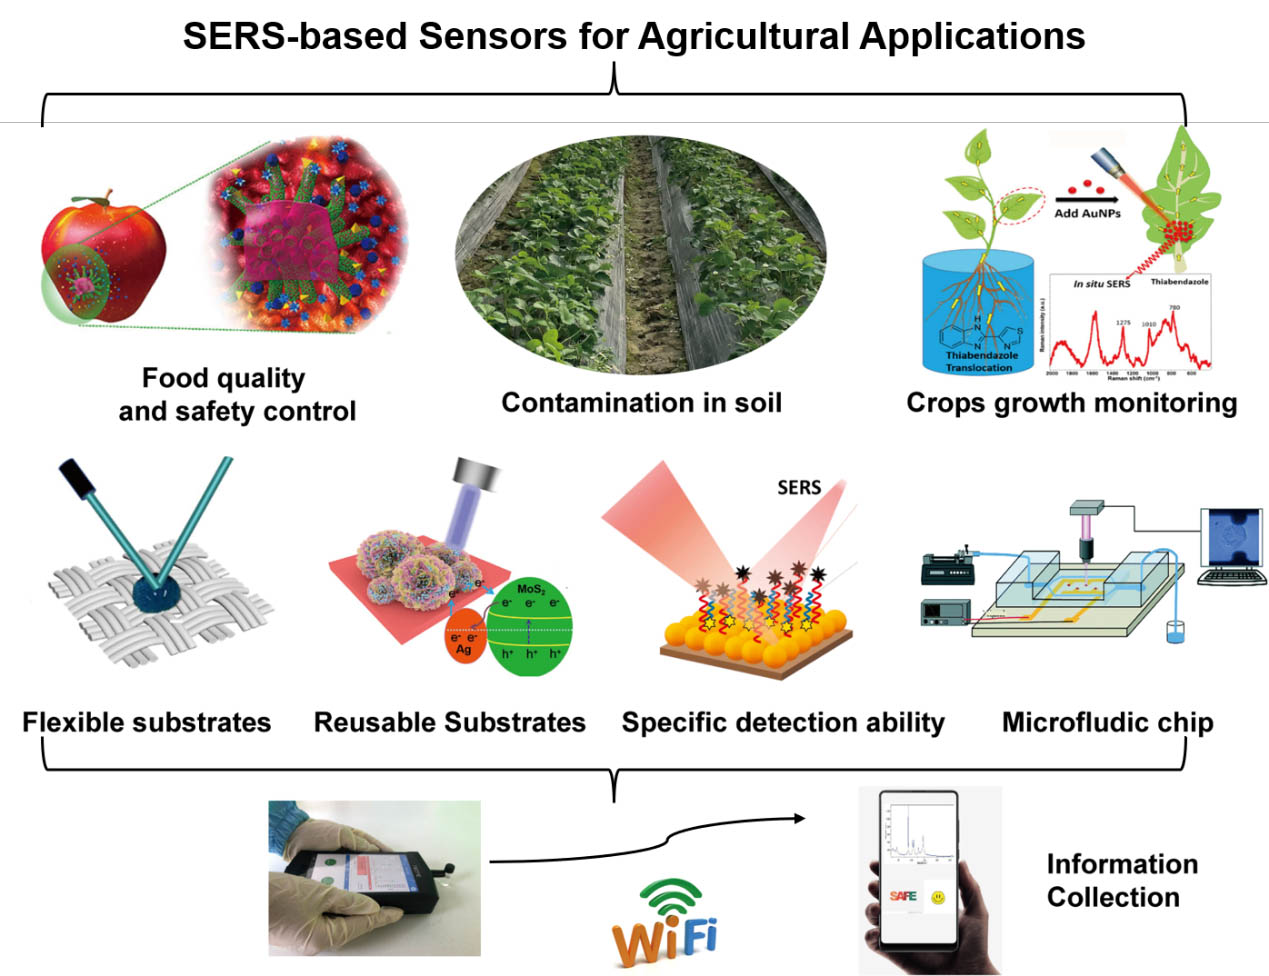 SERS-based Sensors Offer Guidance for Agricultural Applications